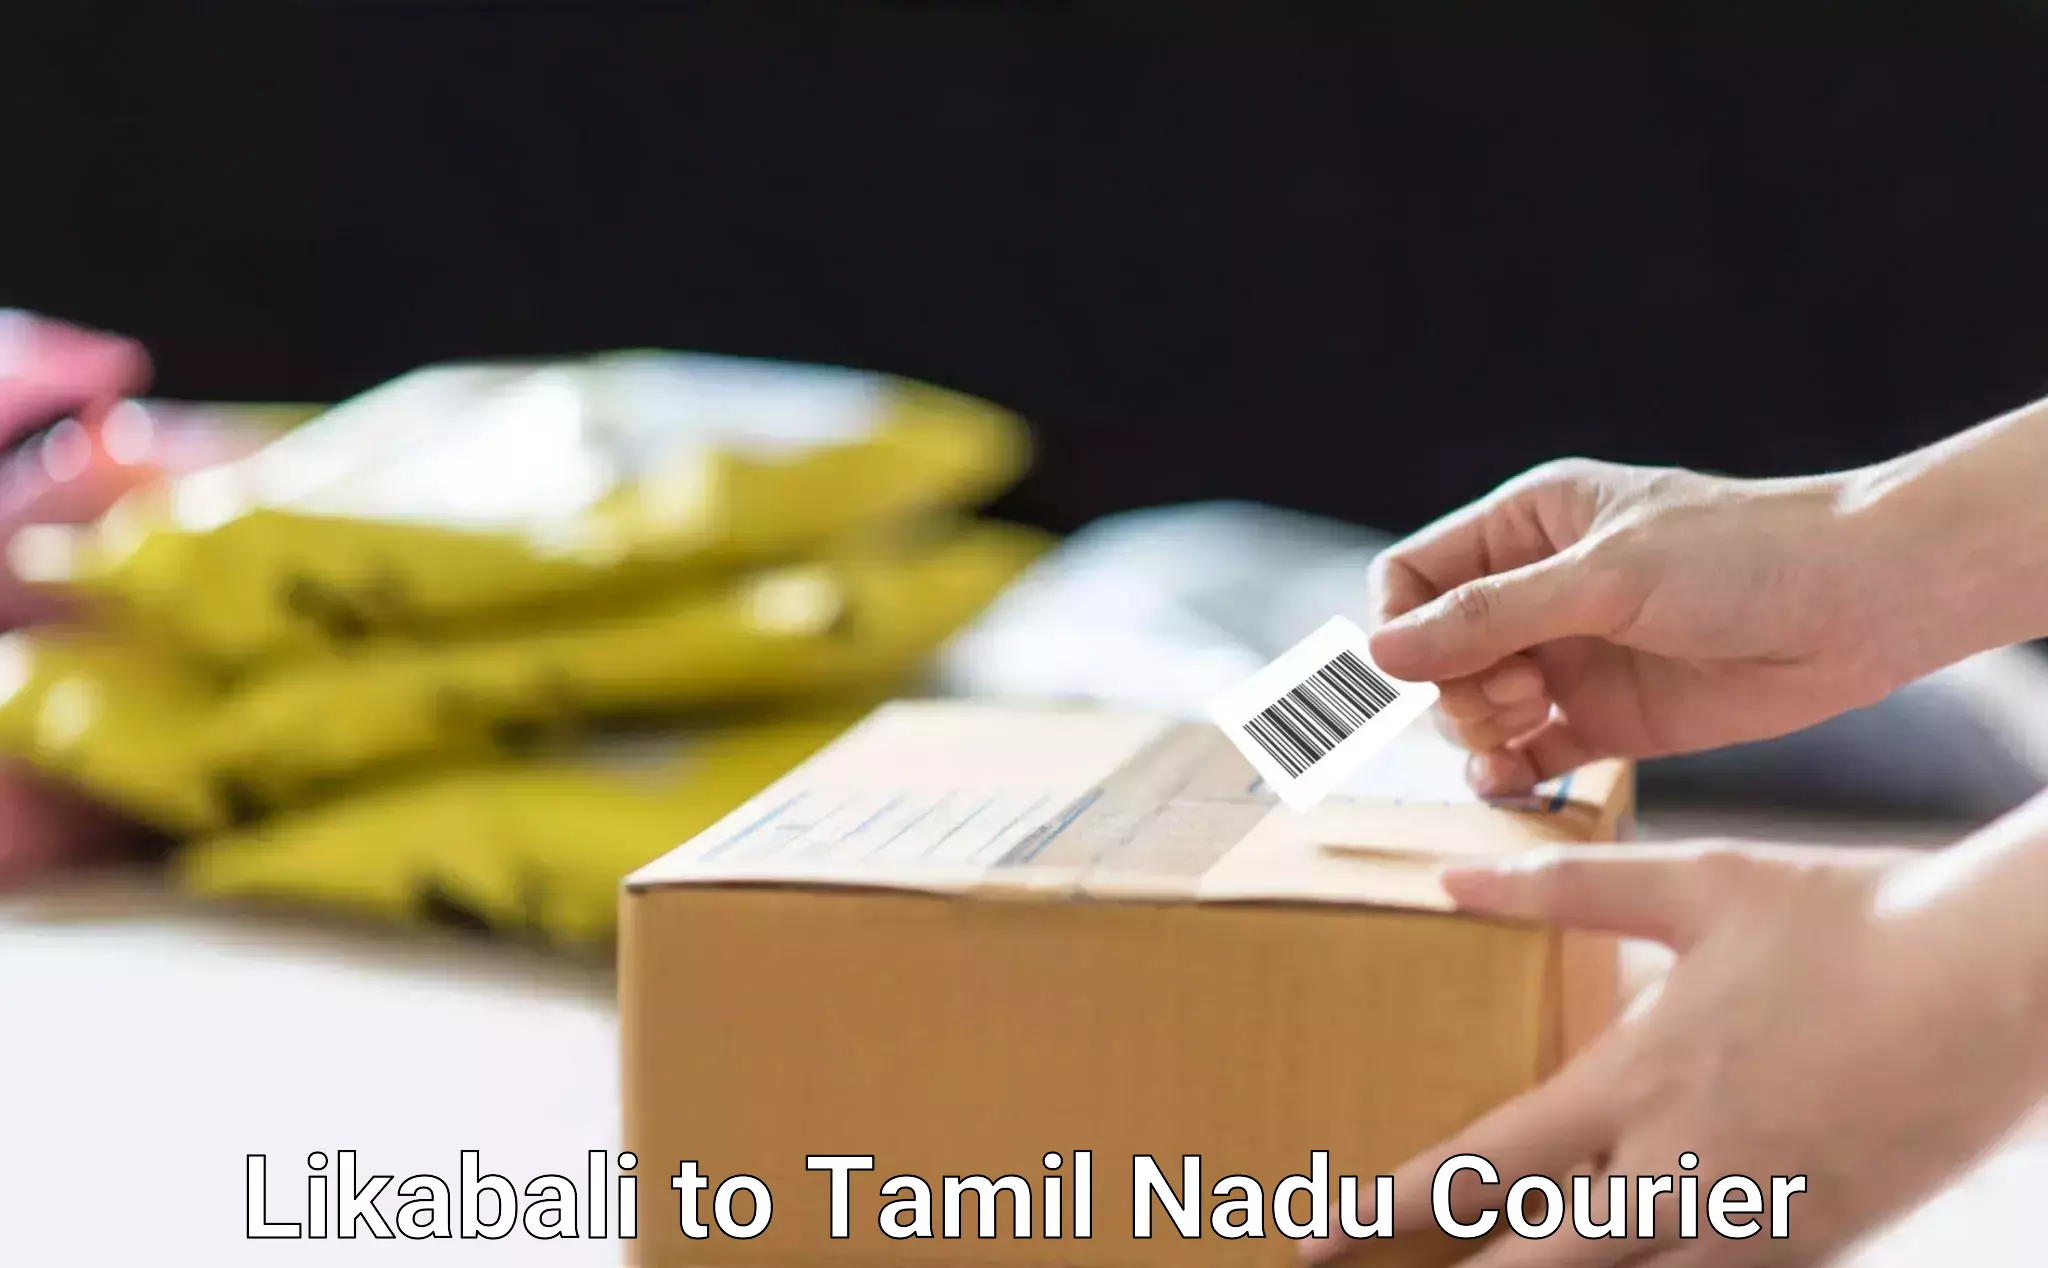 Professional courier services Likabali to Melmaruvathur